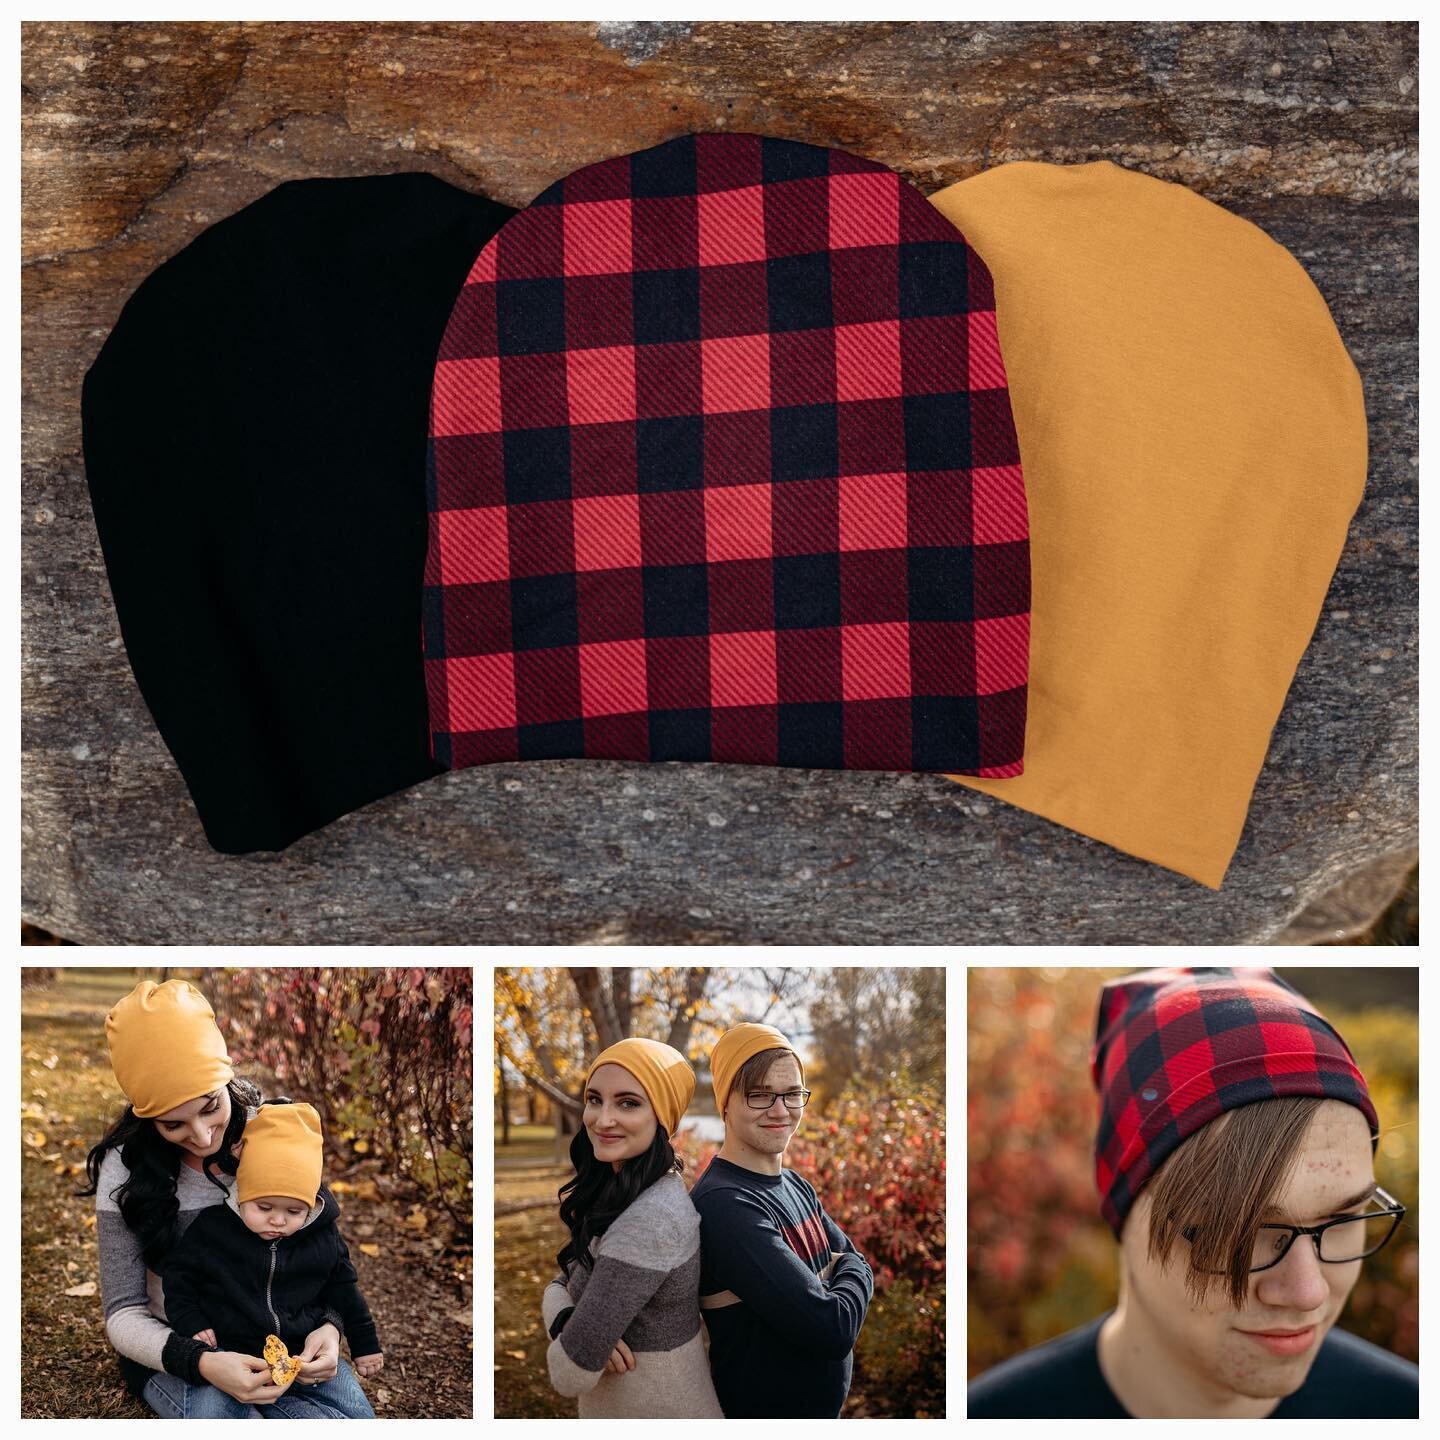 Meet the Makers - Wholly Handmade December 10/11

@reynassewingmachine 

Reyna's Sewing Machine manufacturers high quality sewn items Hair accessories, beanies, Cutie booties and Heatbags right here in Red Deer. She also provides custom sewing and me